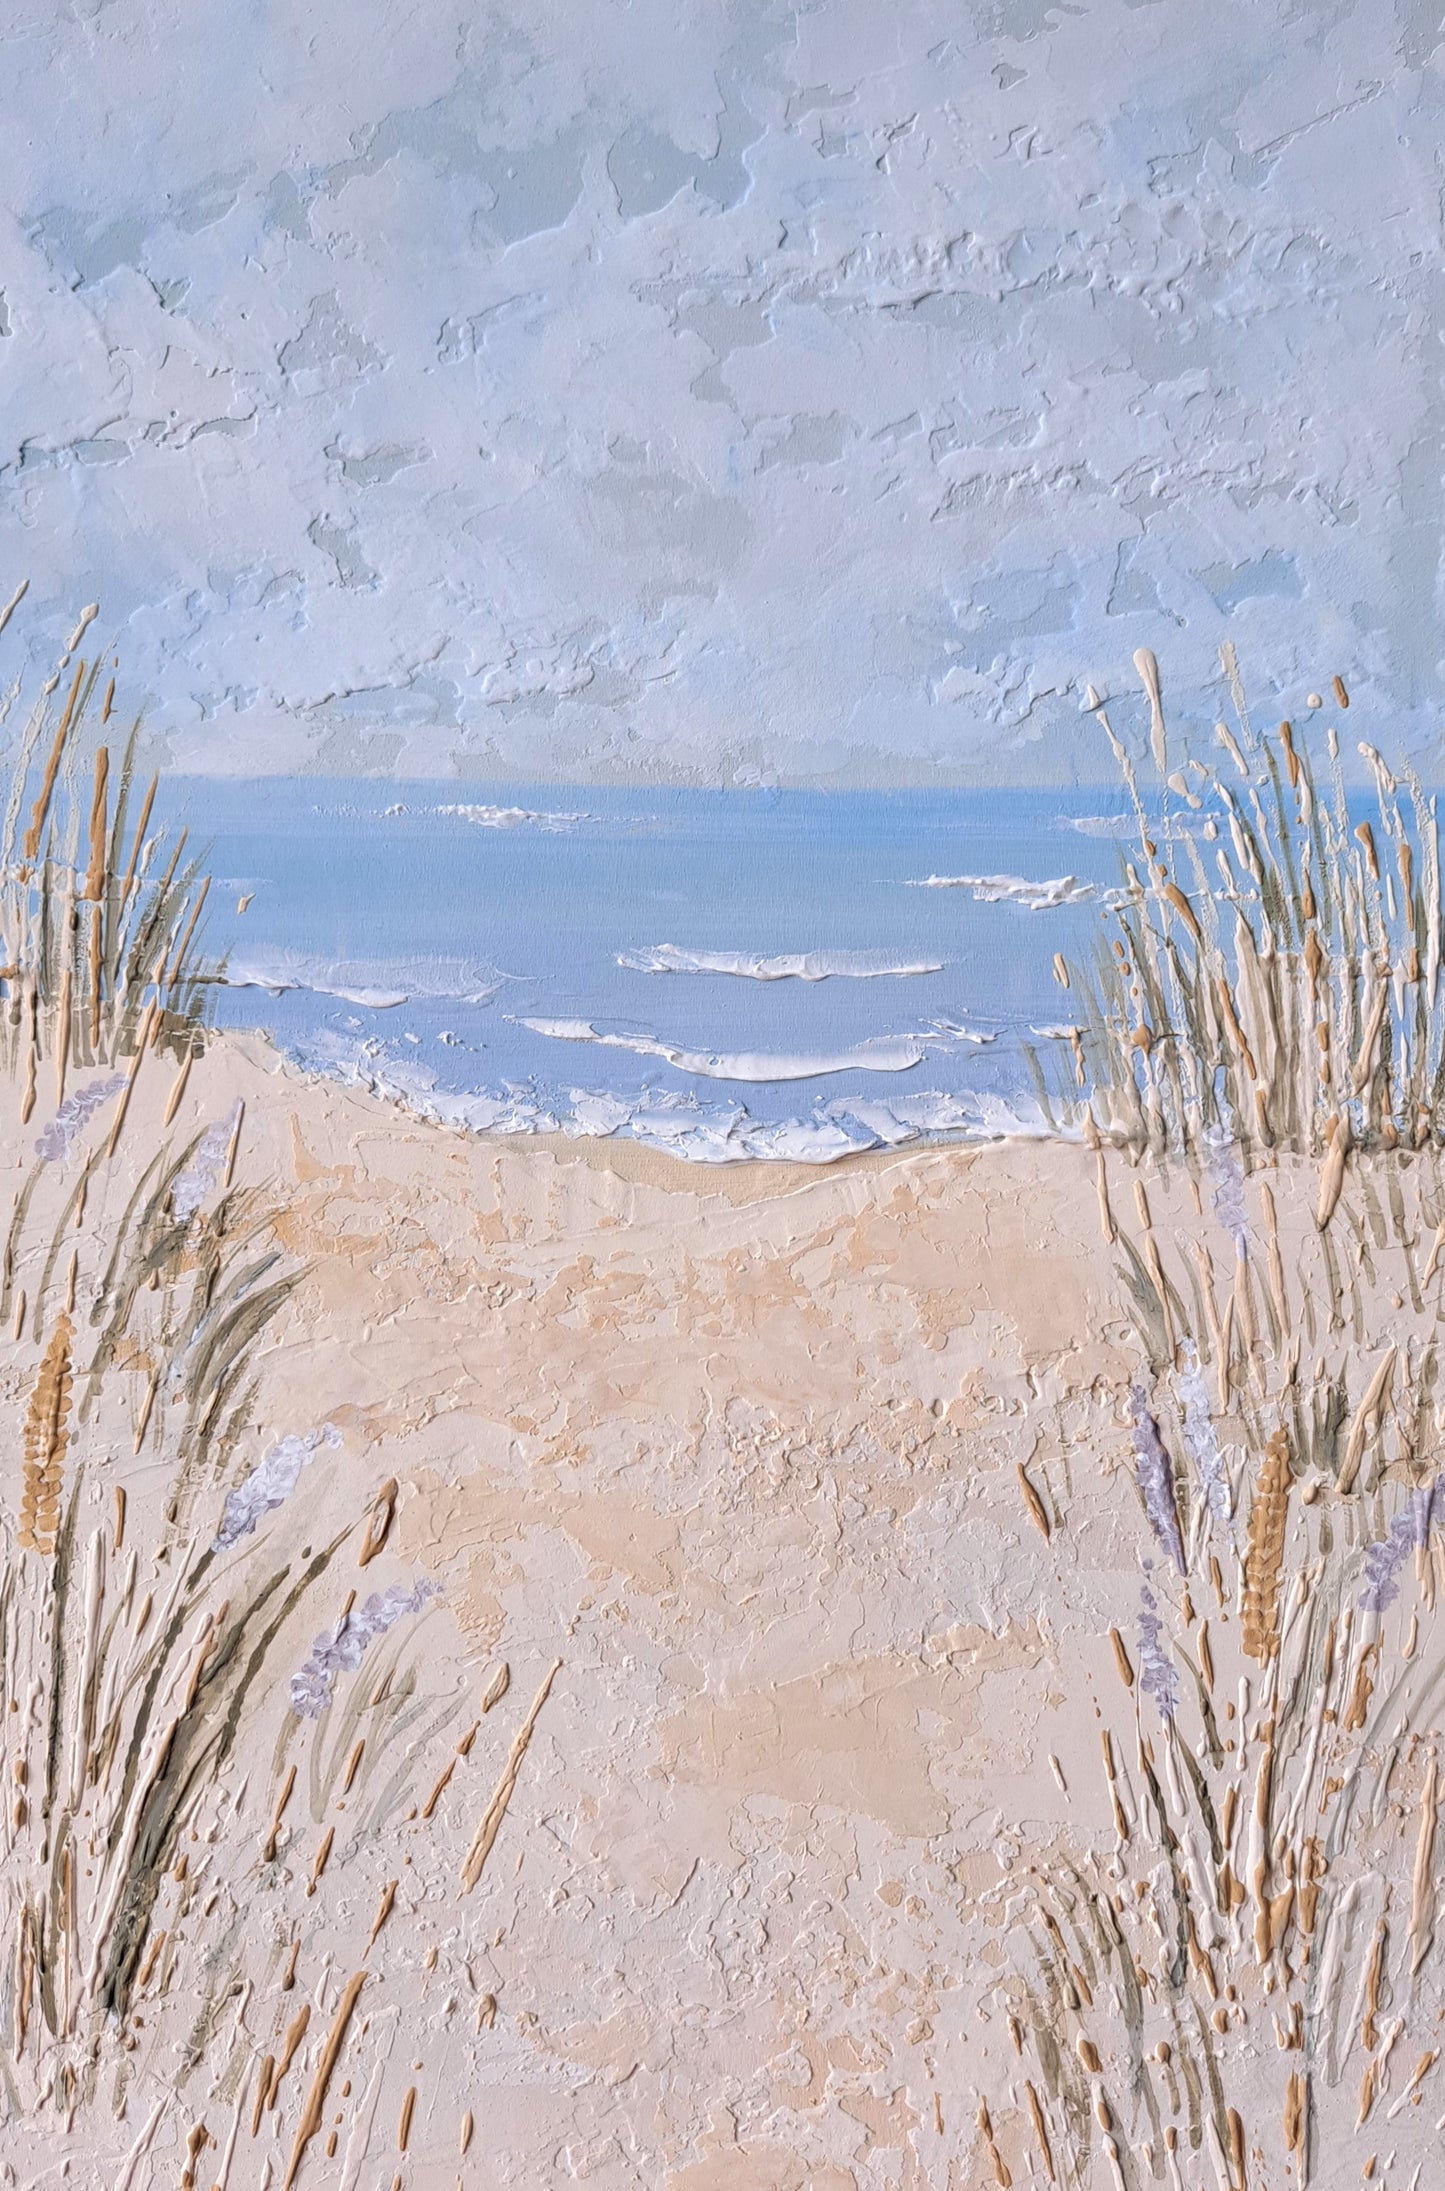 Textured hand-painted scenic beach painting on solid wood panel.